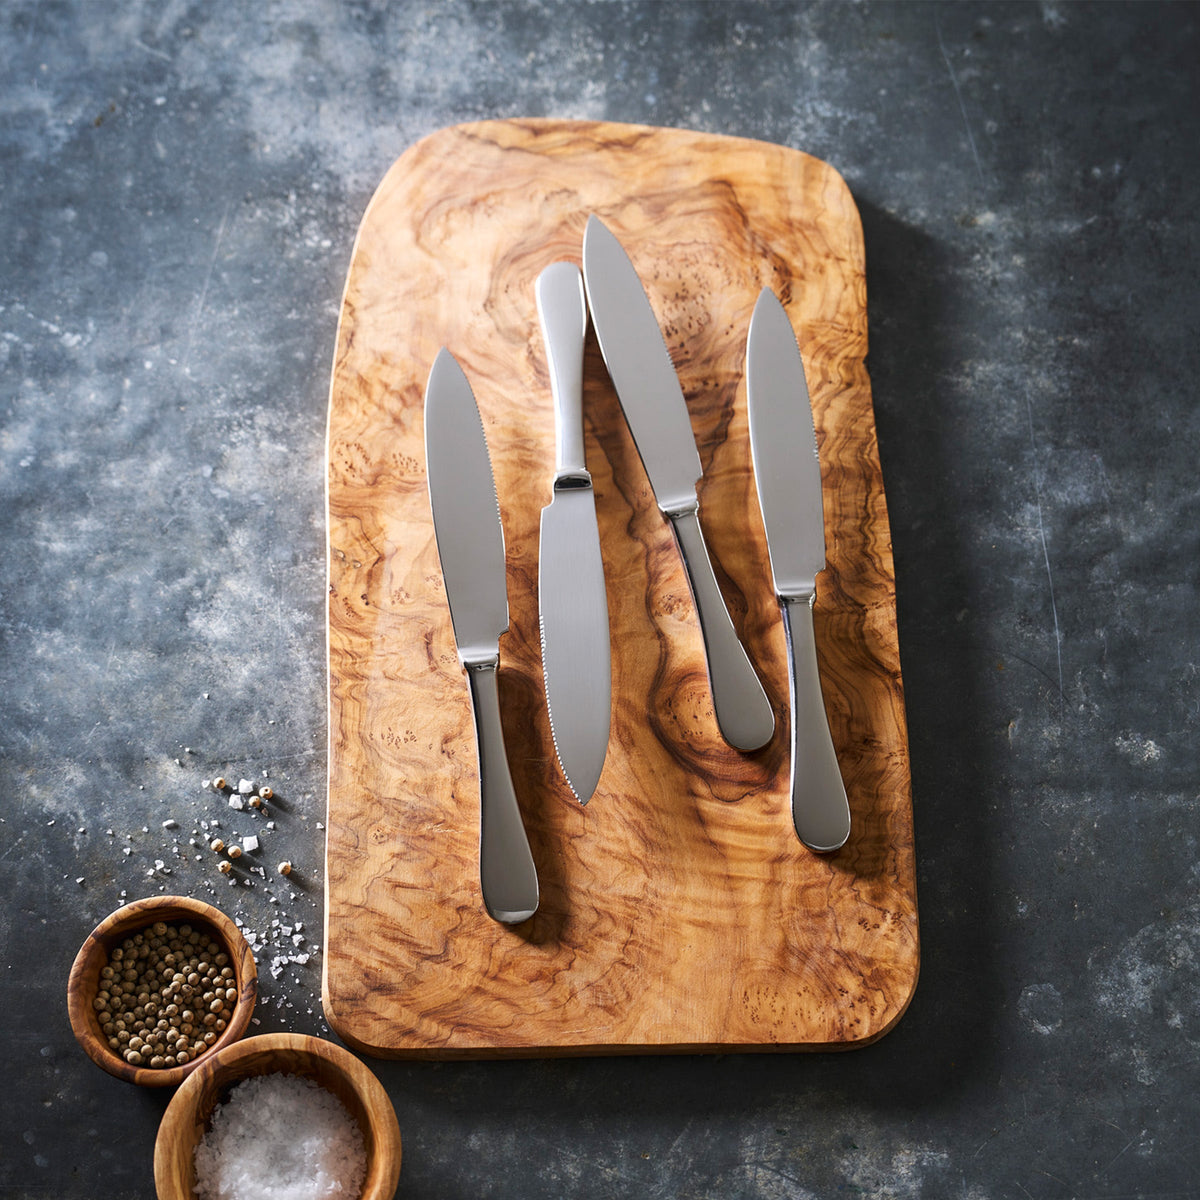 Four Mepra Mirror Set/4 Steak Knives on a wooden cutting board, polished to perfection.